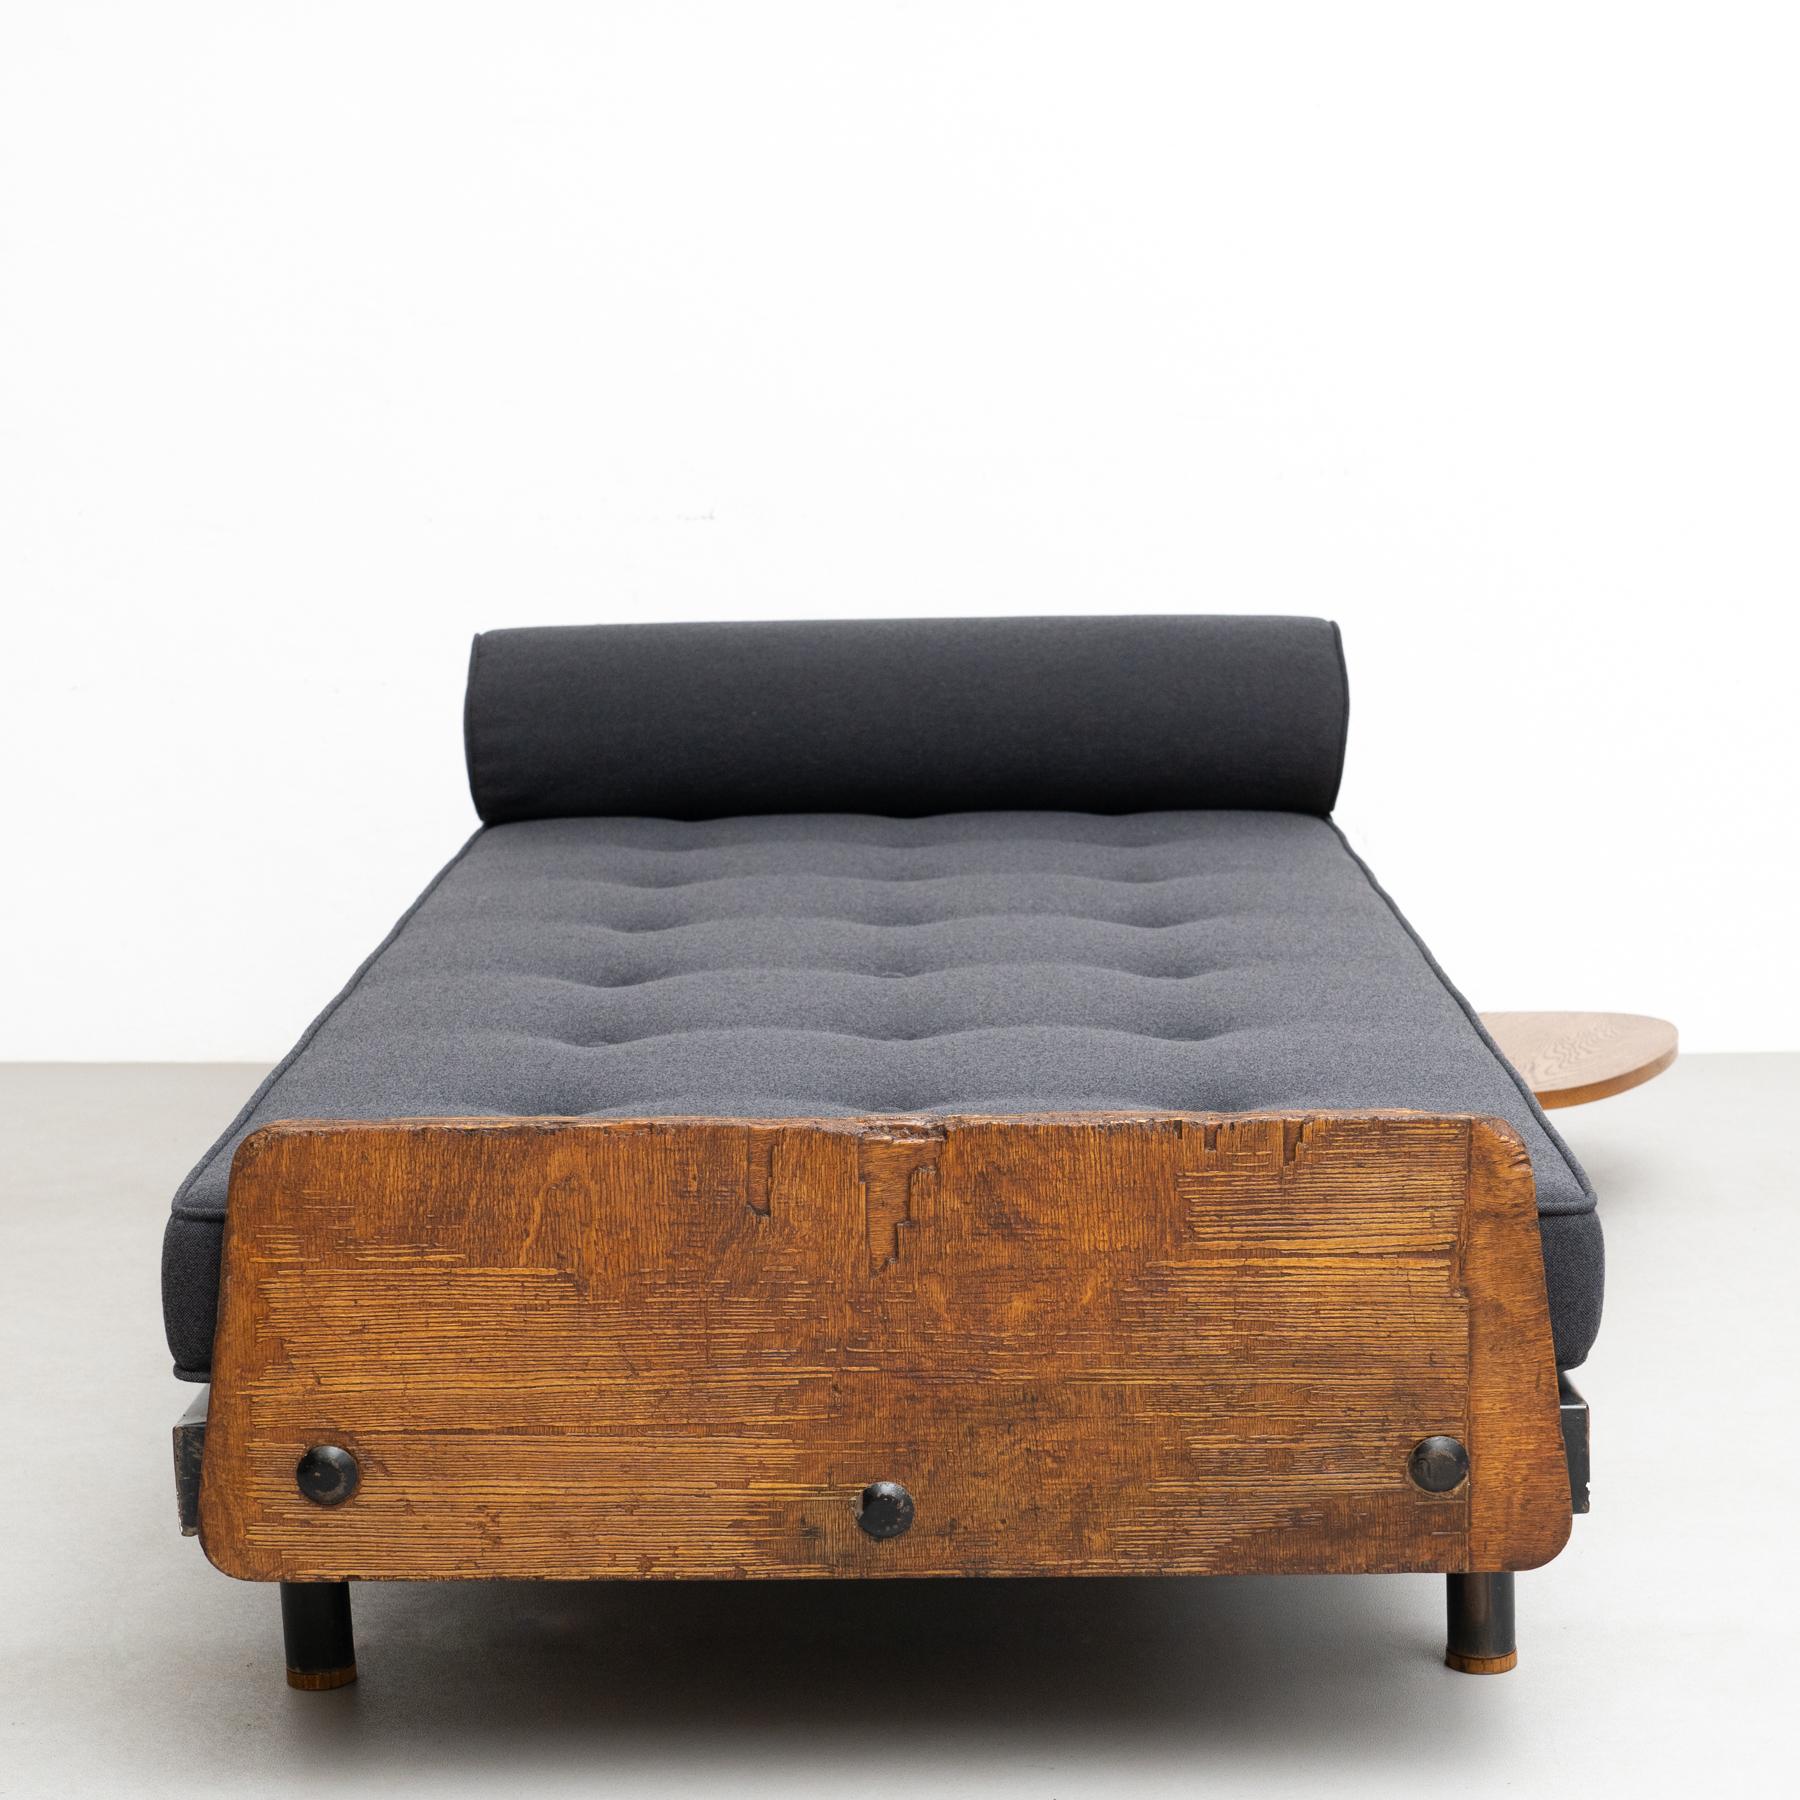 Jean Prouve Mid-Century Modern S.C.A.L. Daybed, circa 1950 1